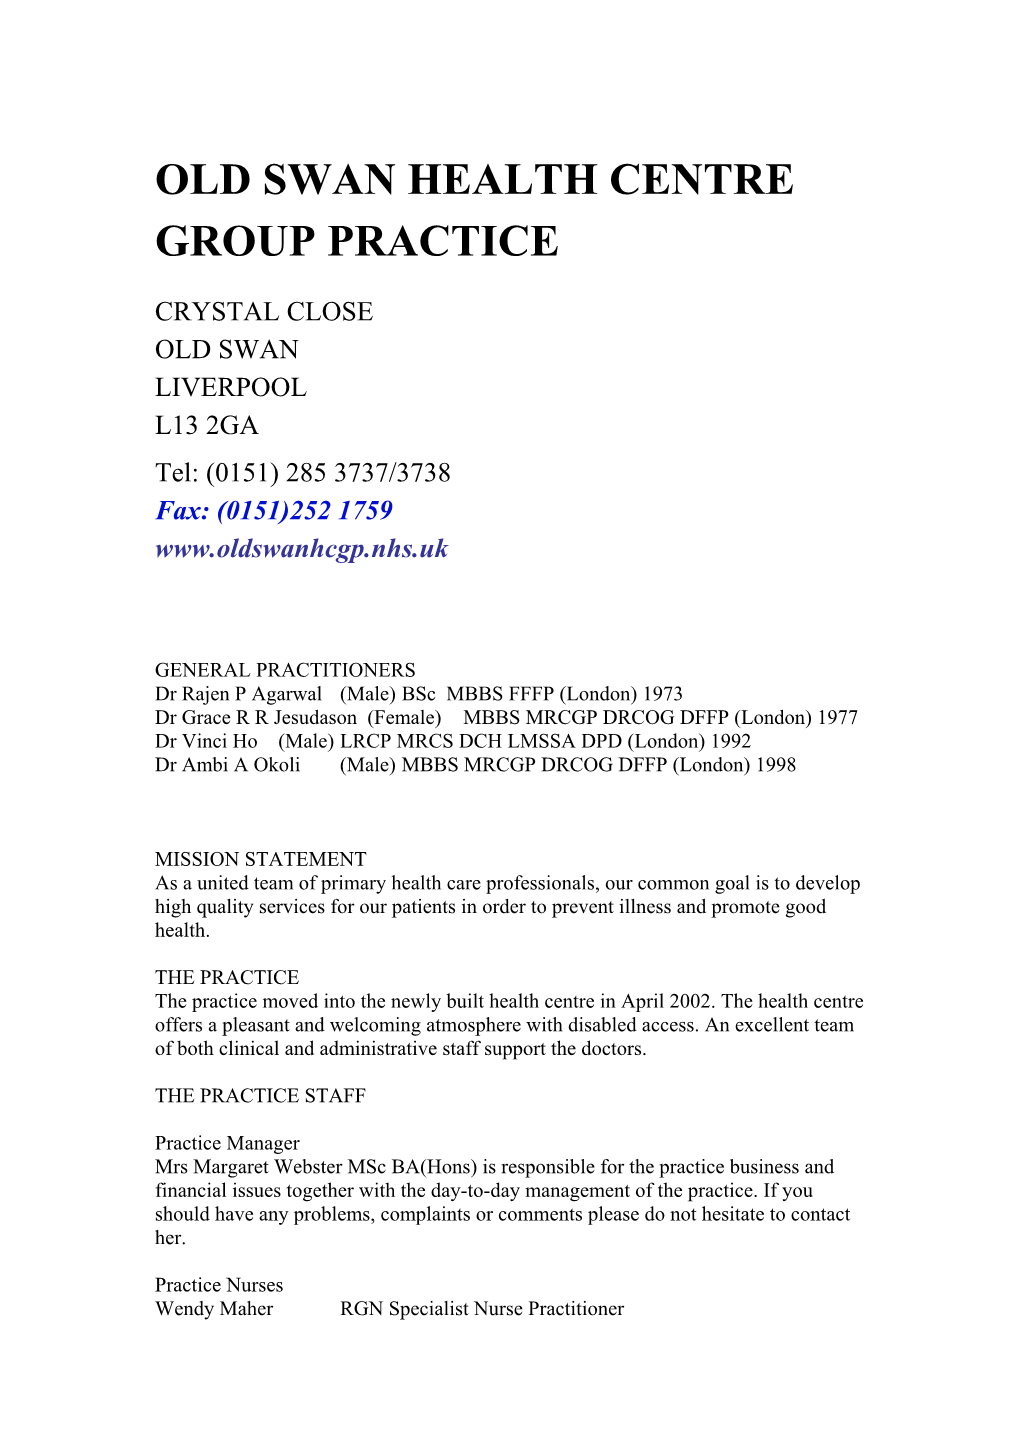 Read Our Practice Leaflet